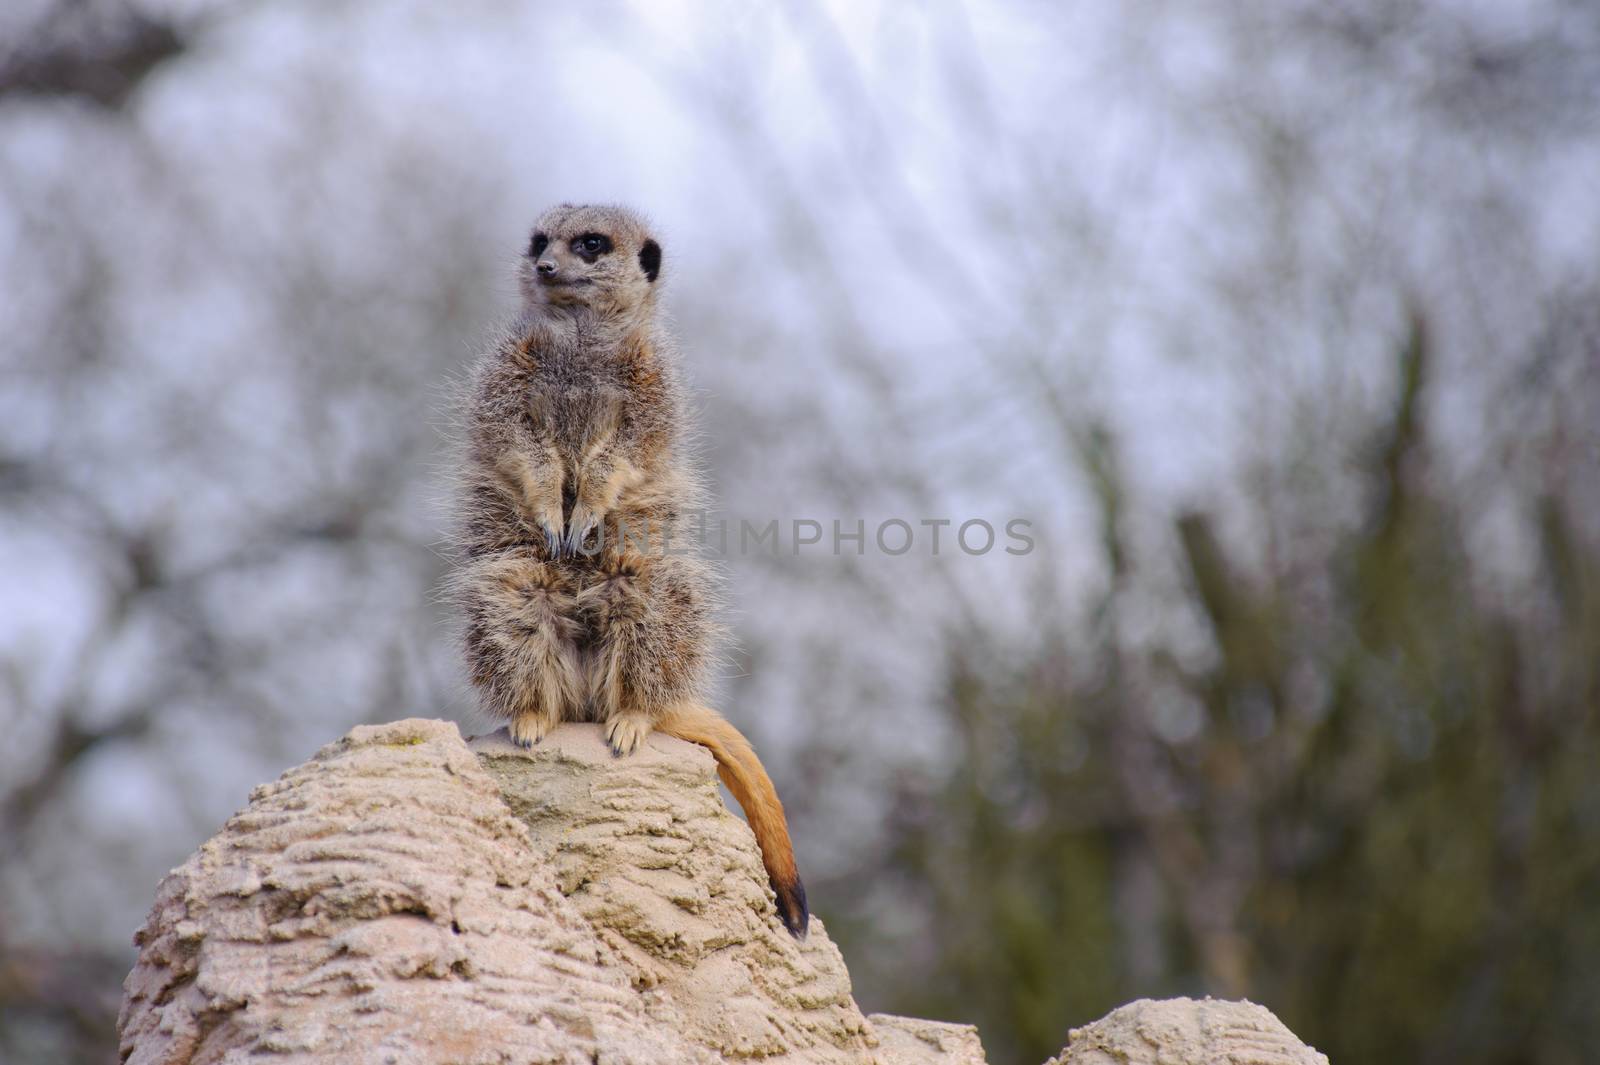 Meercat looking cute by kmwphotography